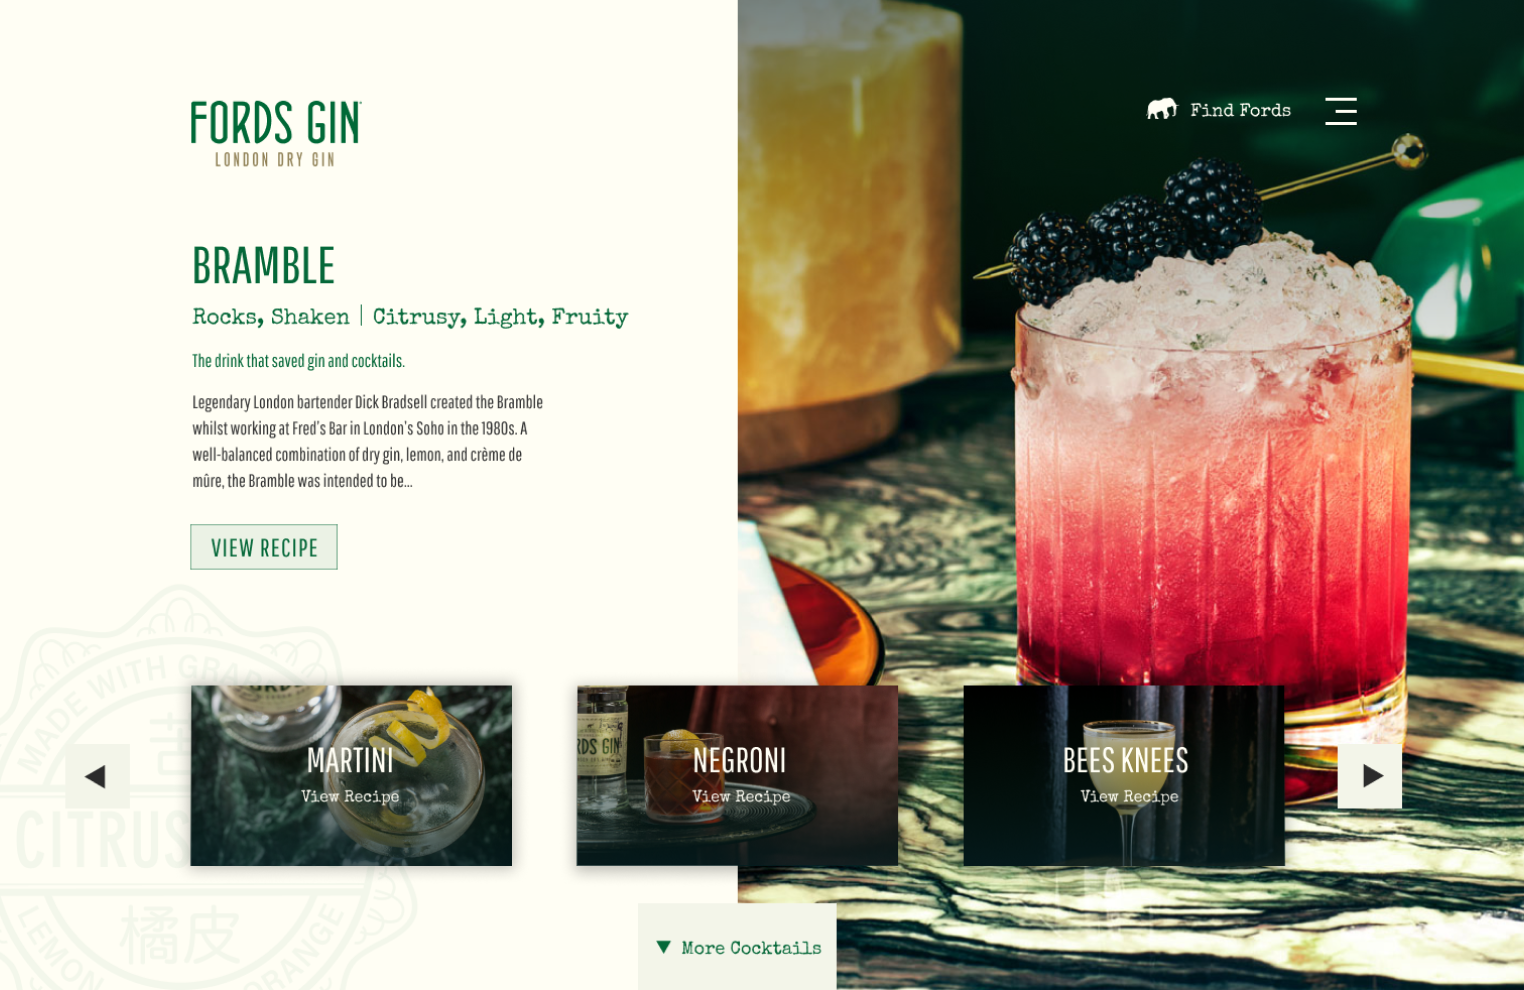 Screengrab of a Drink named 'Bramble' a description, and the option to view more cocktails